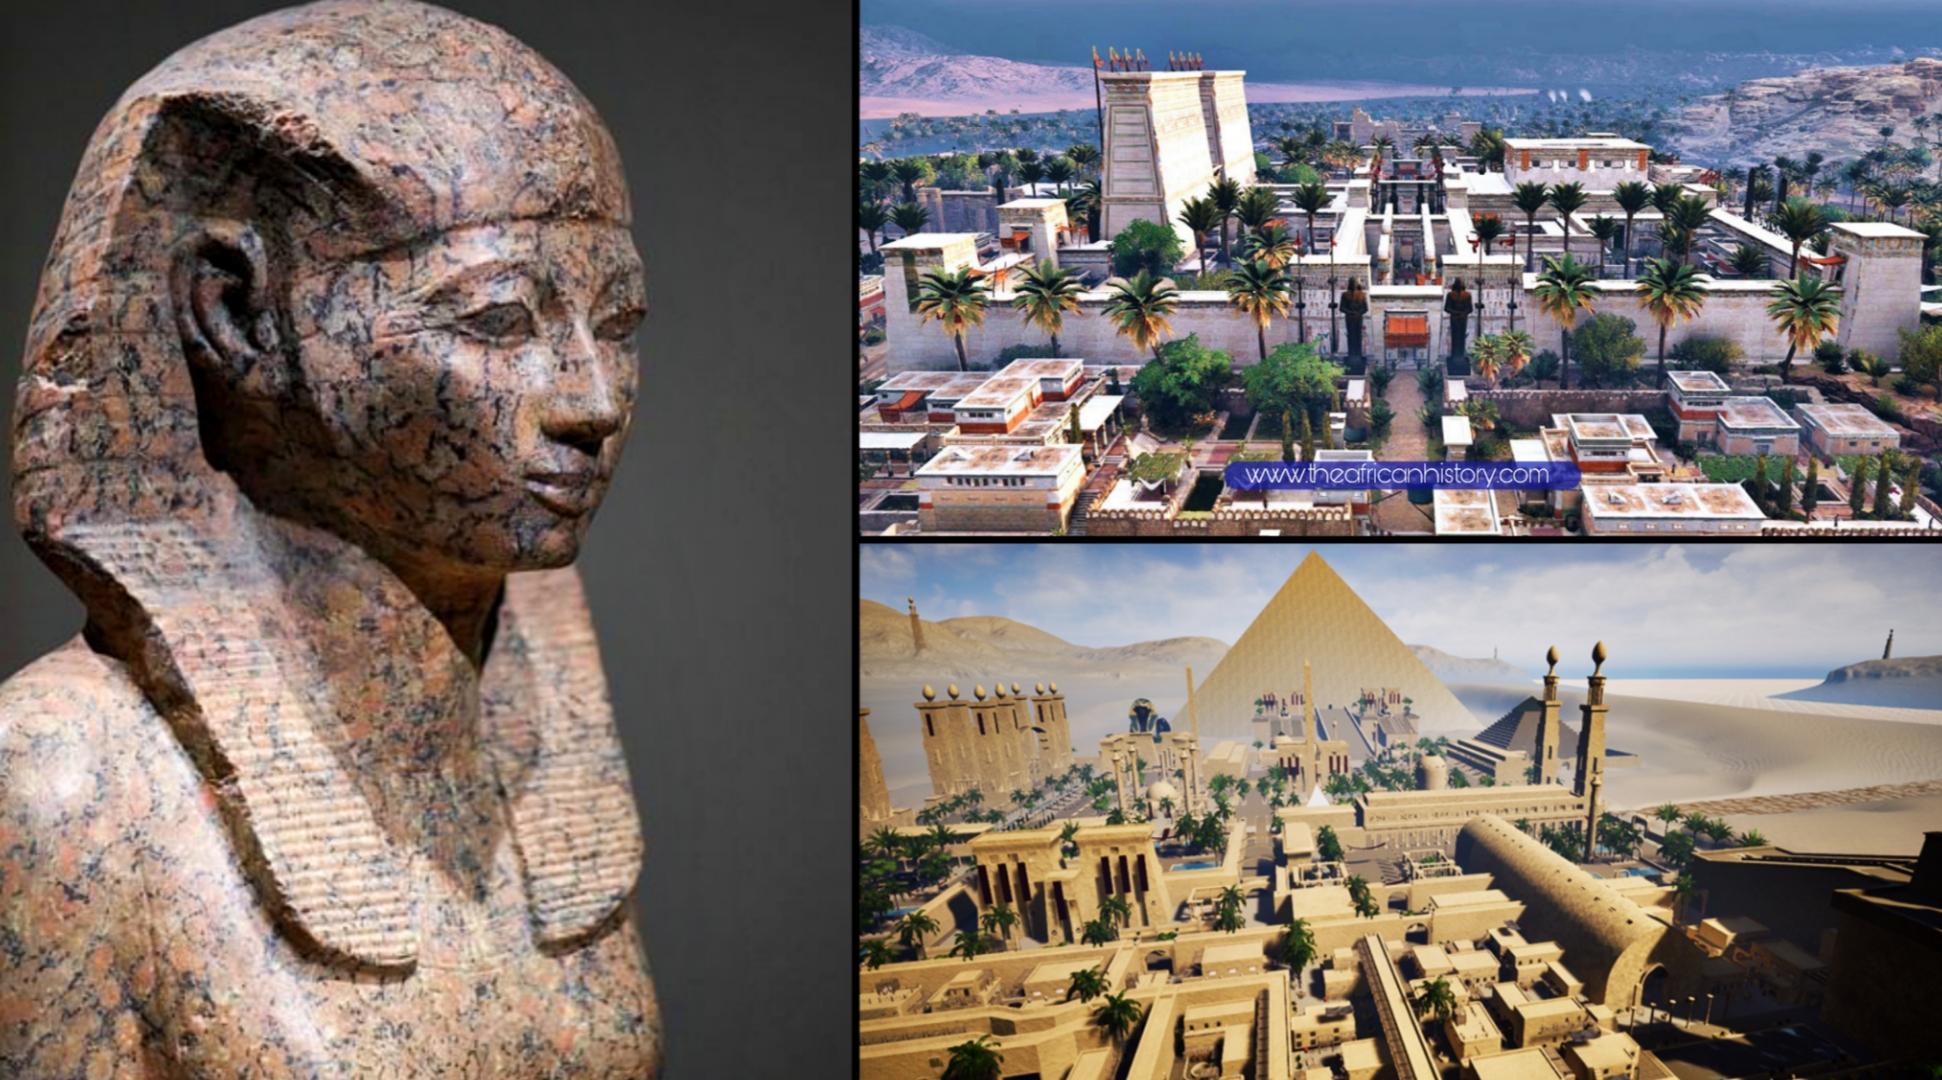 Hatshepsut, Ancient Egyptian brave Queen Warroir who ruled as a Pharaoh in 1478 BC